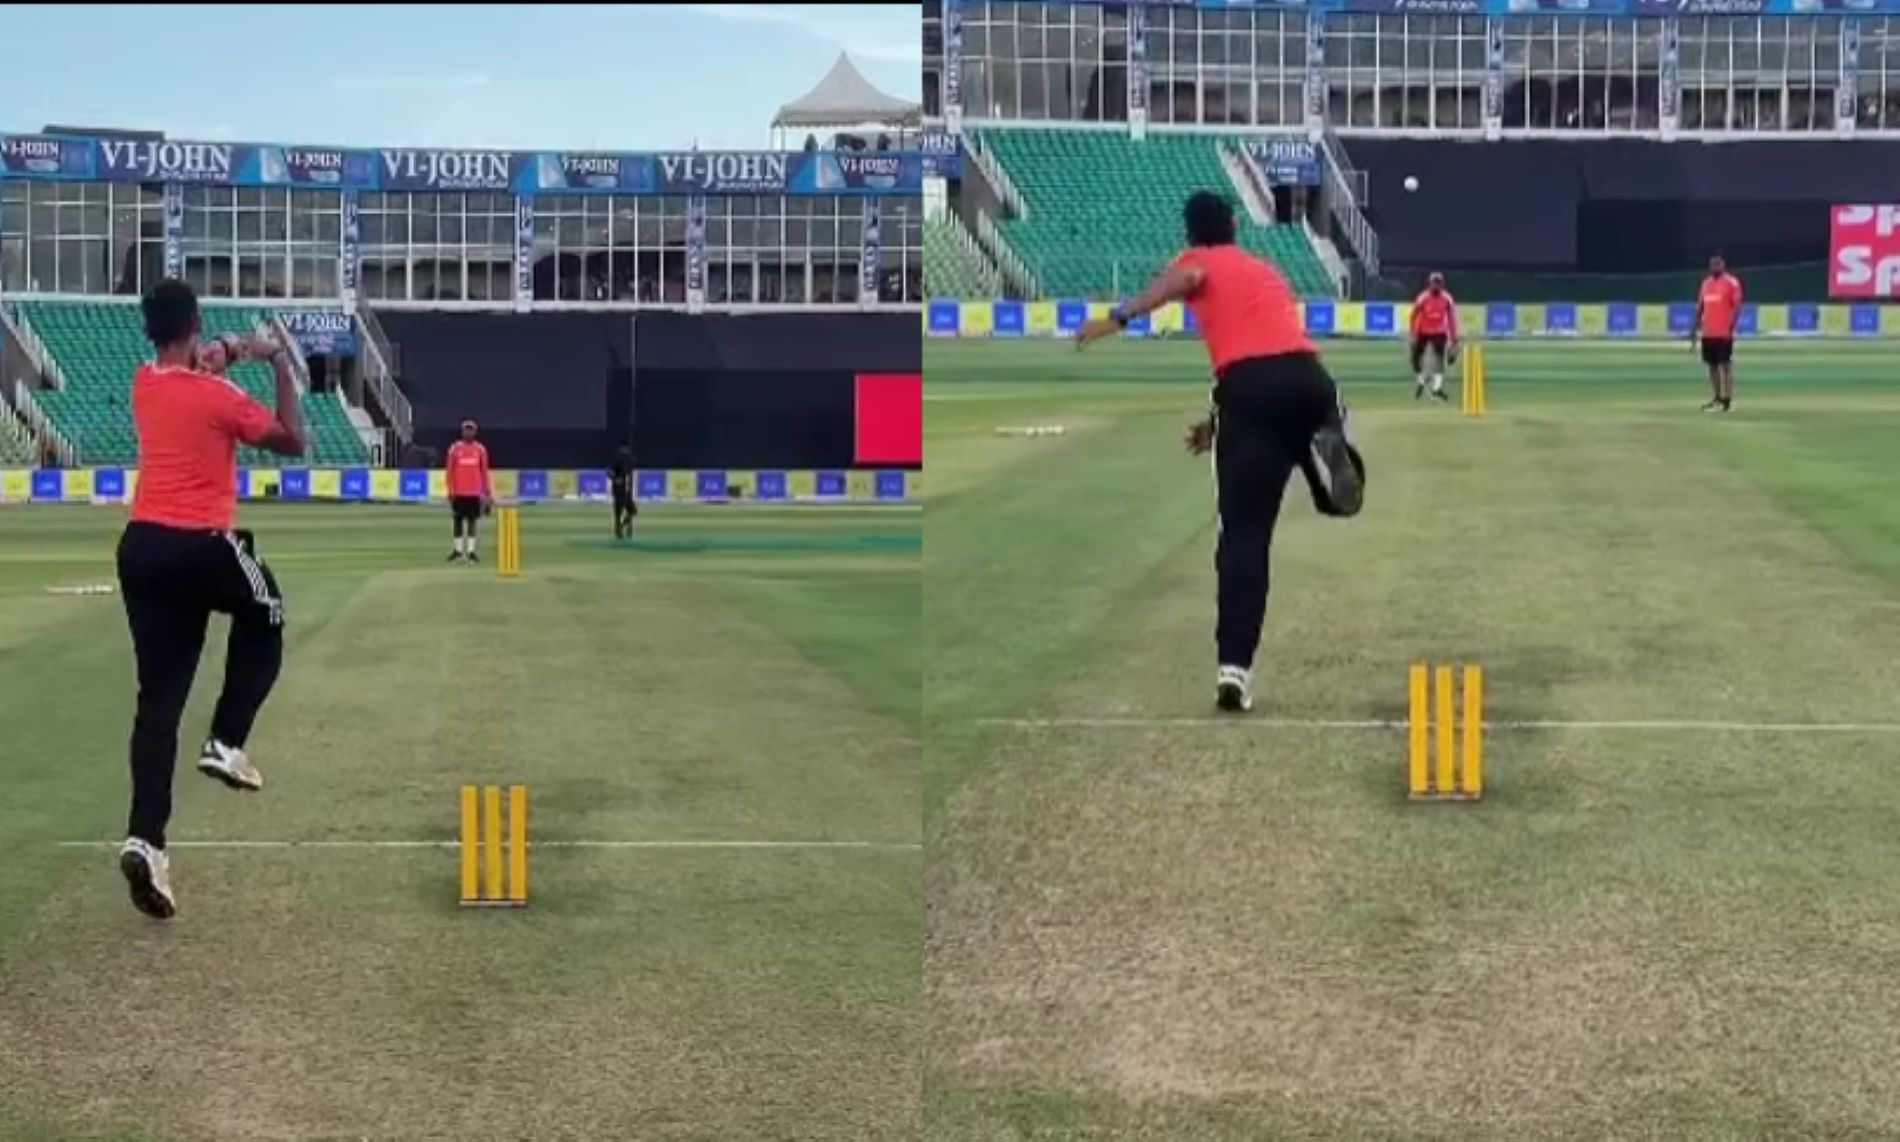 Jaiswal showcases his spin-bowling skills ahead of the 3rd T20I